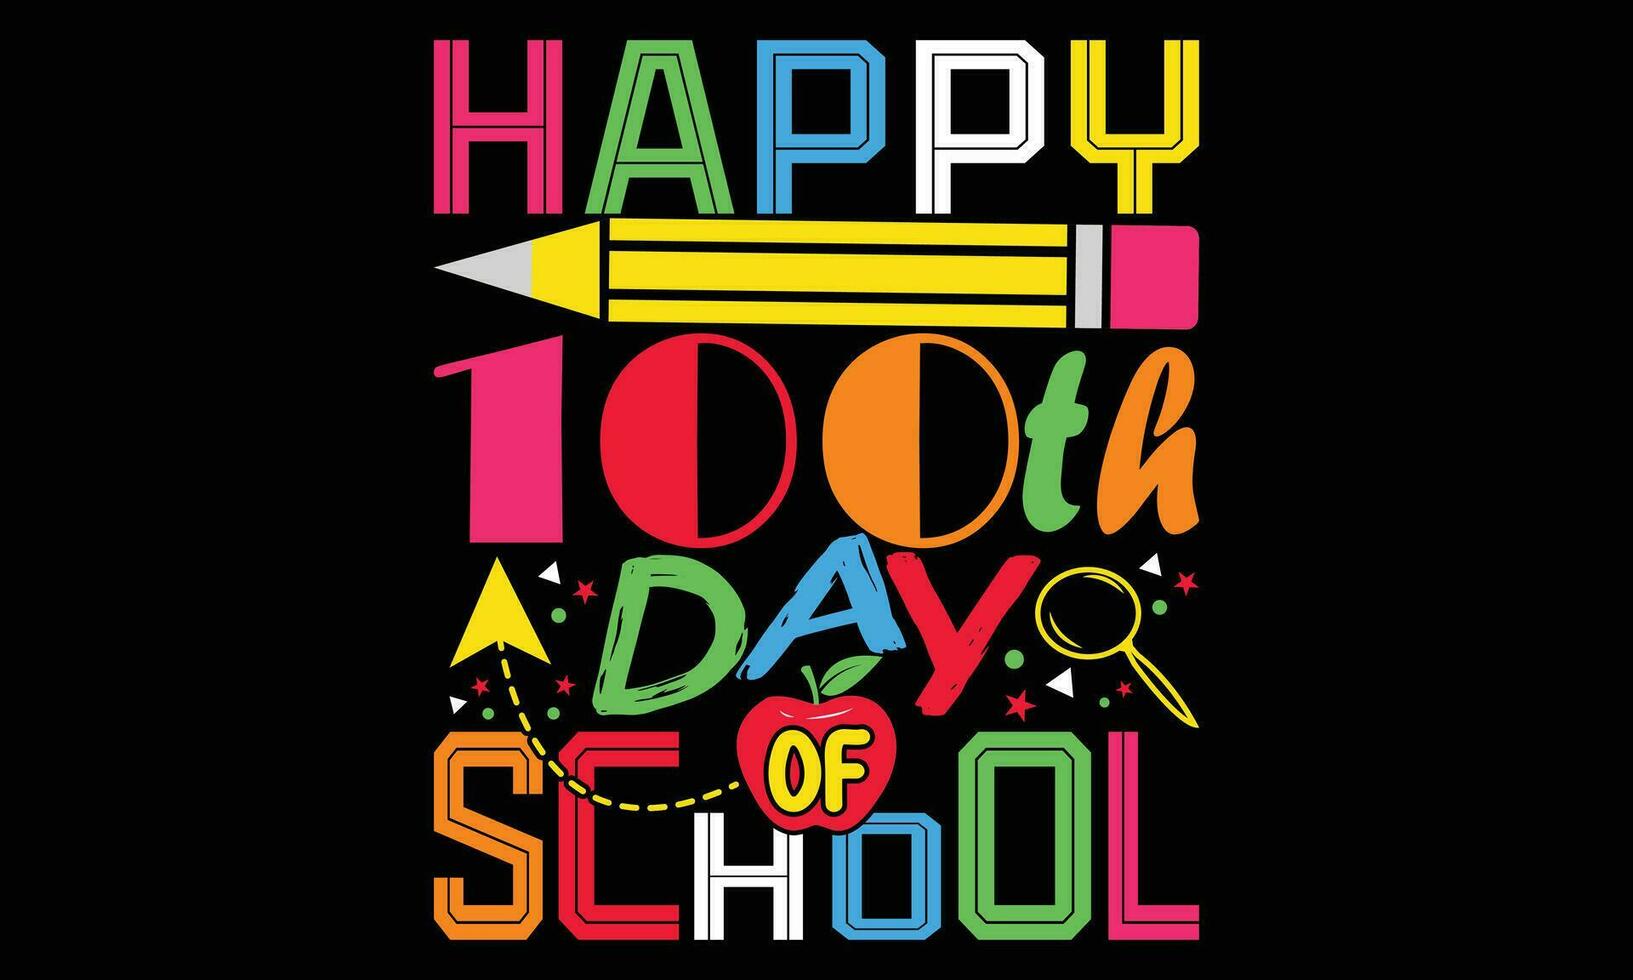 Happy First Day of School Life Design, 100 Days of School Life T-shirt Design, Back to School Vibes T-shirt Design. vector